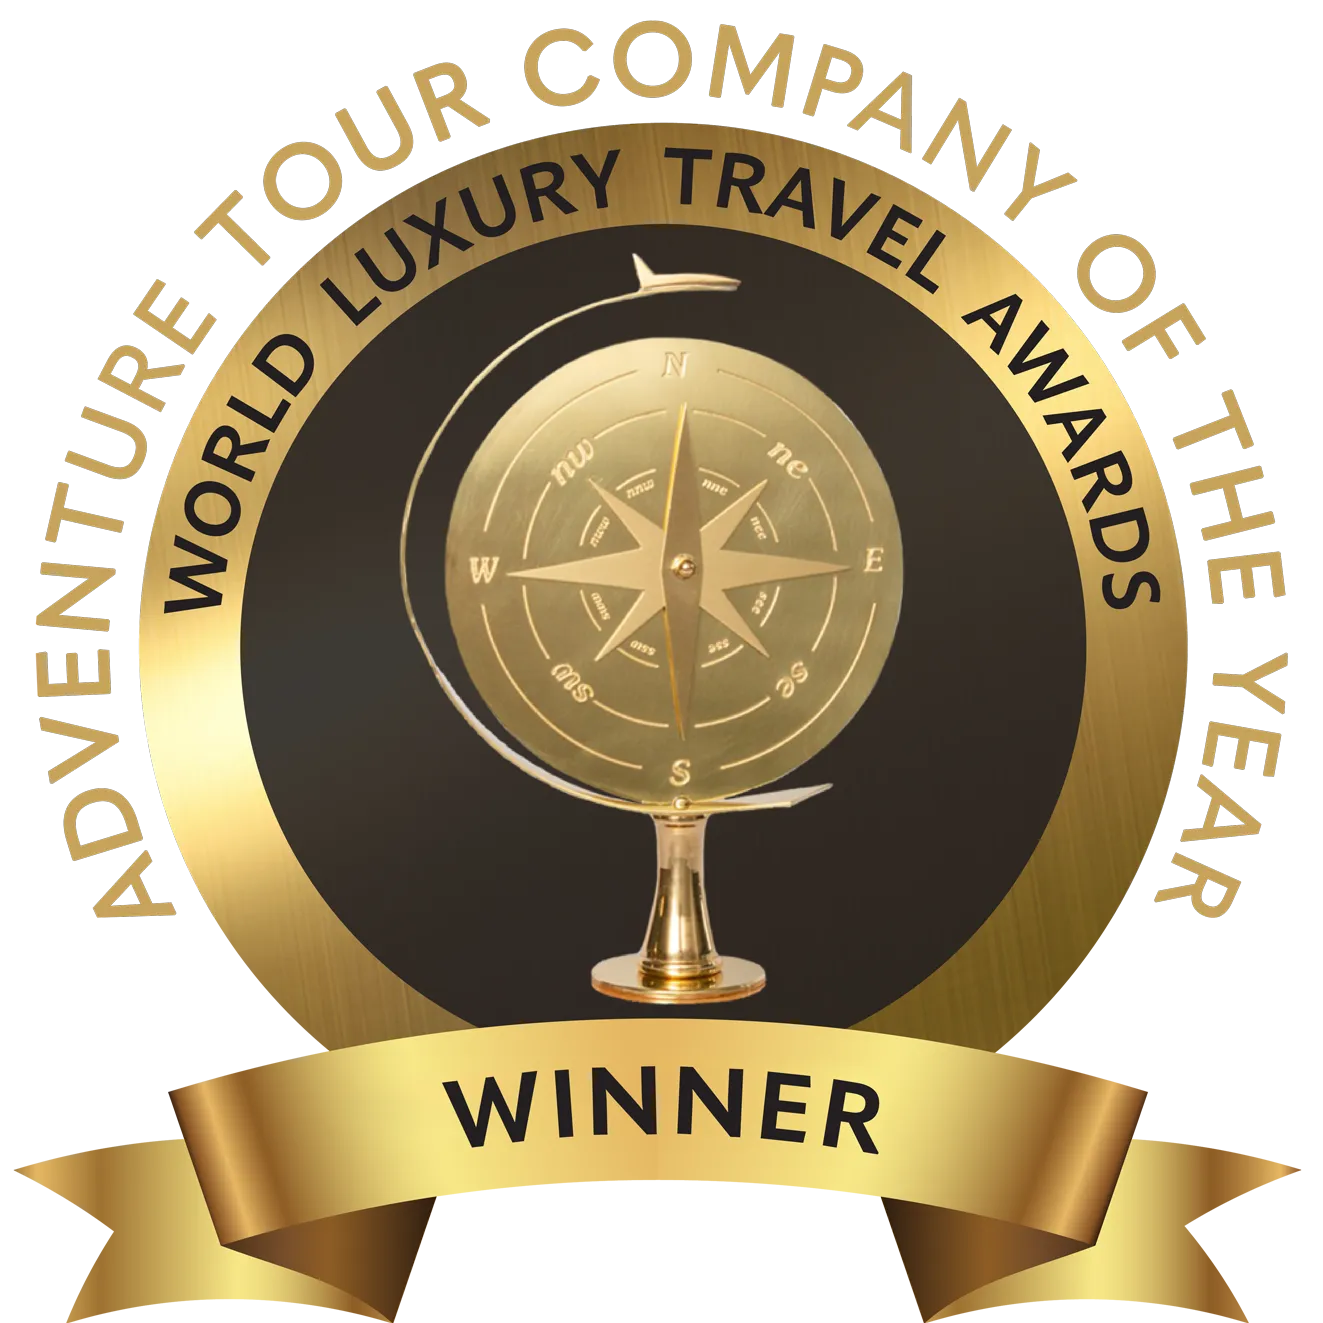 Adventure Tour Company of the Year